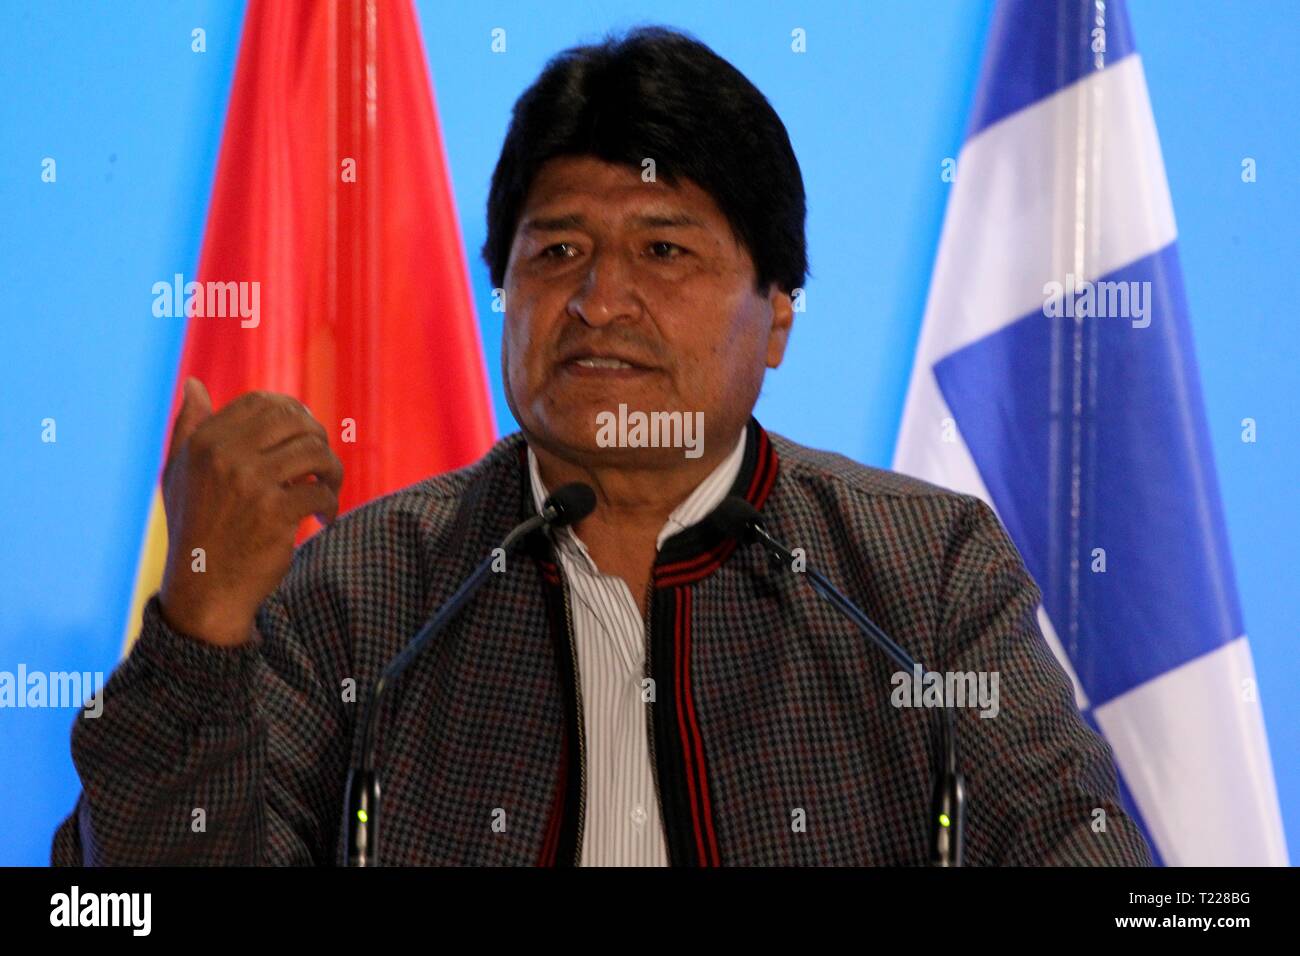 Bolivian President Evo Morales speaks during a conference with Greece's Prime Minister Alexis Tsipras, in Stavros Niarchos Cultural Center. Stock Photo